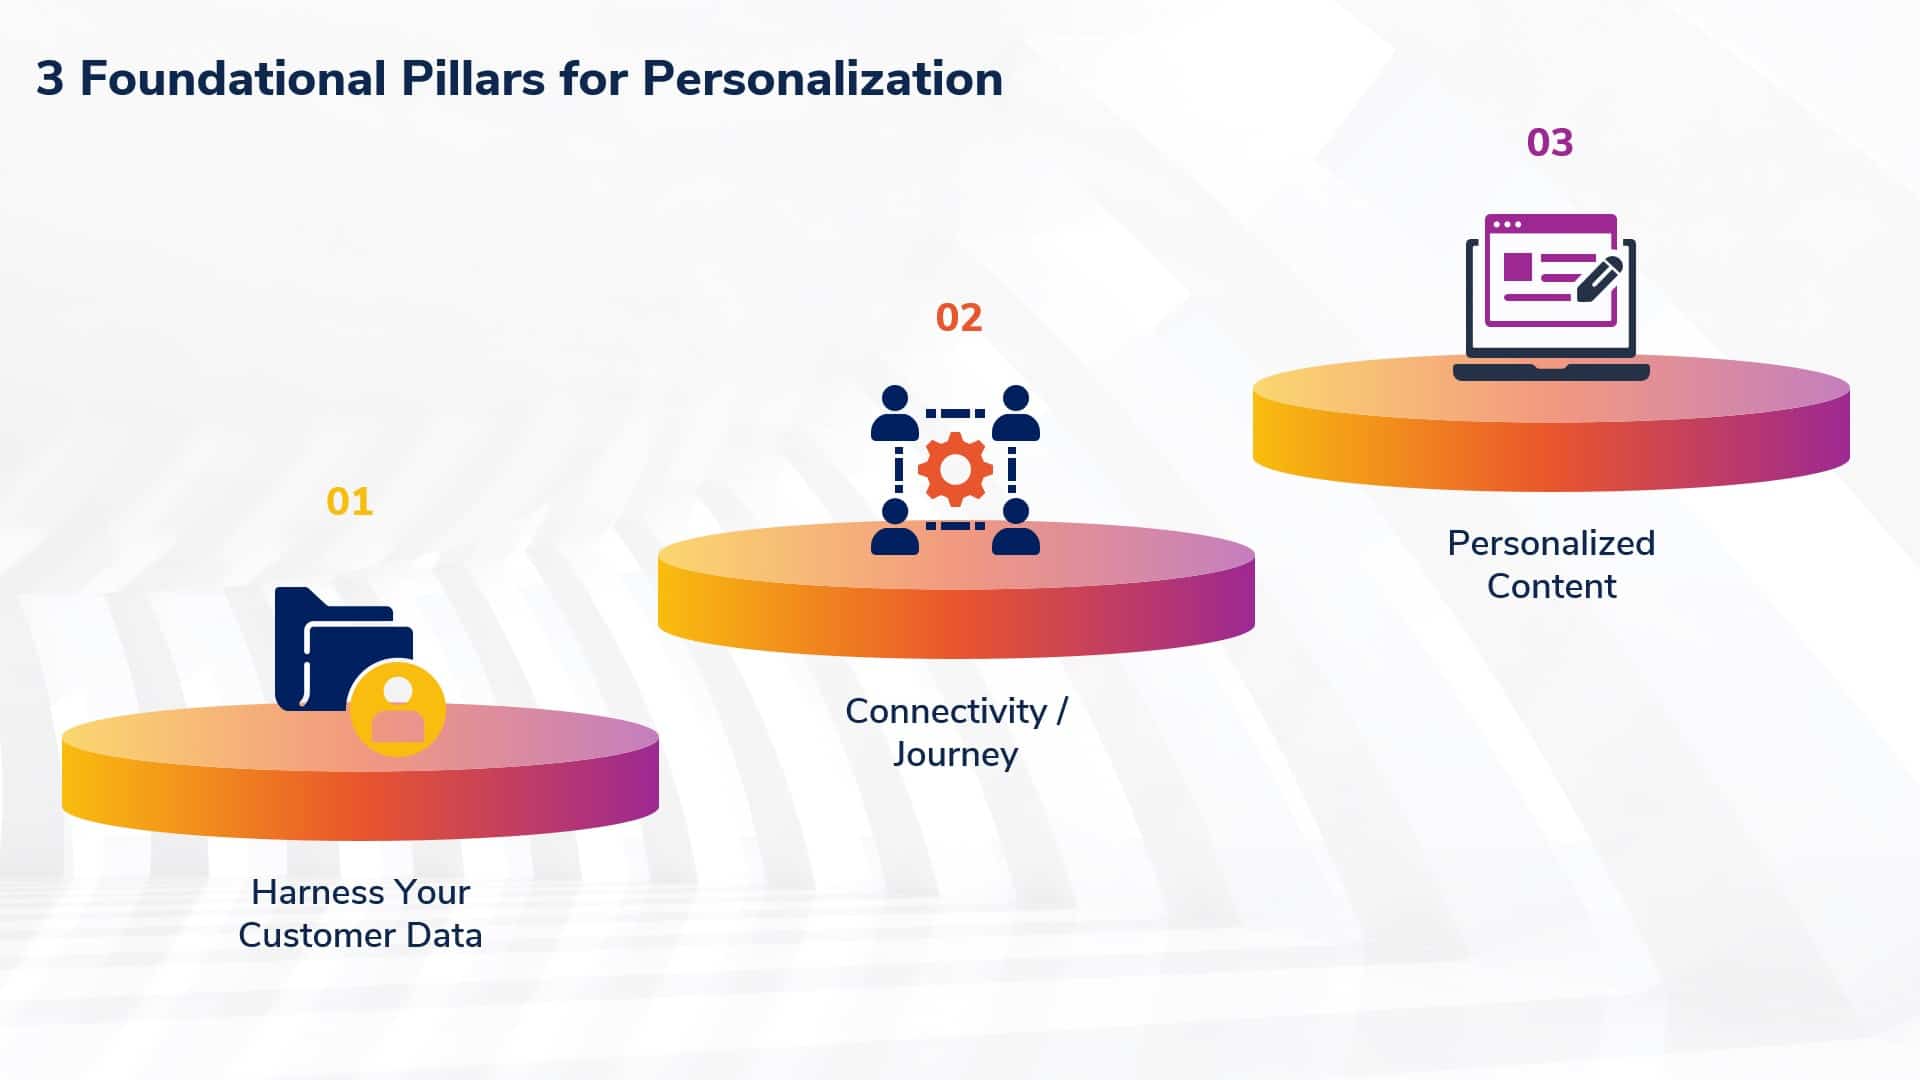 3 Foundational Pillars for Personalization